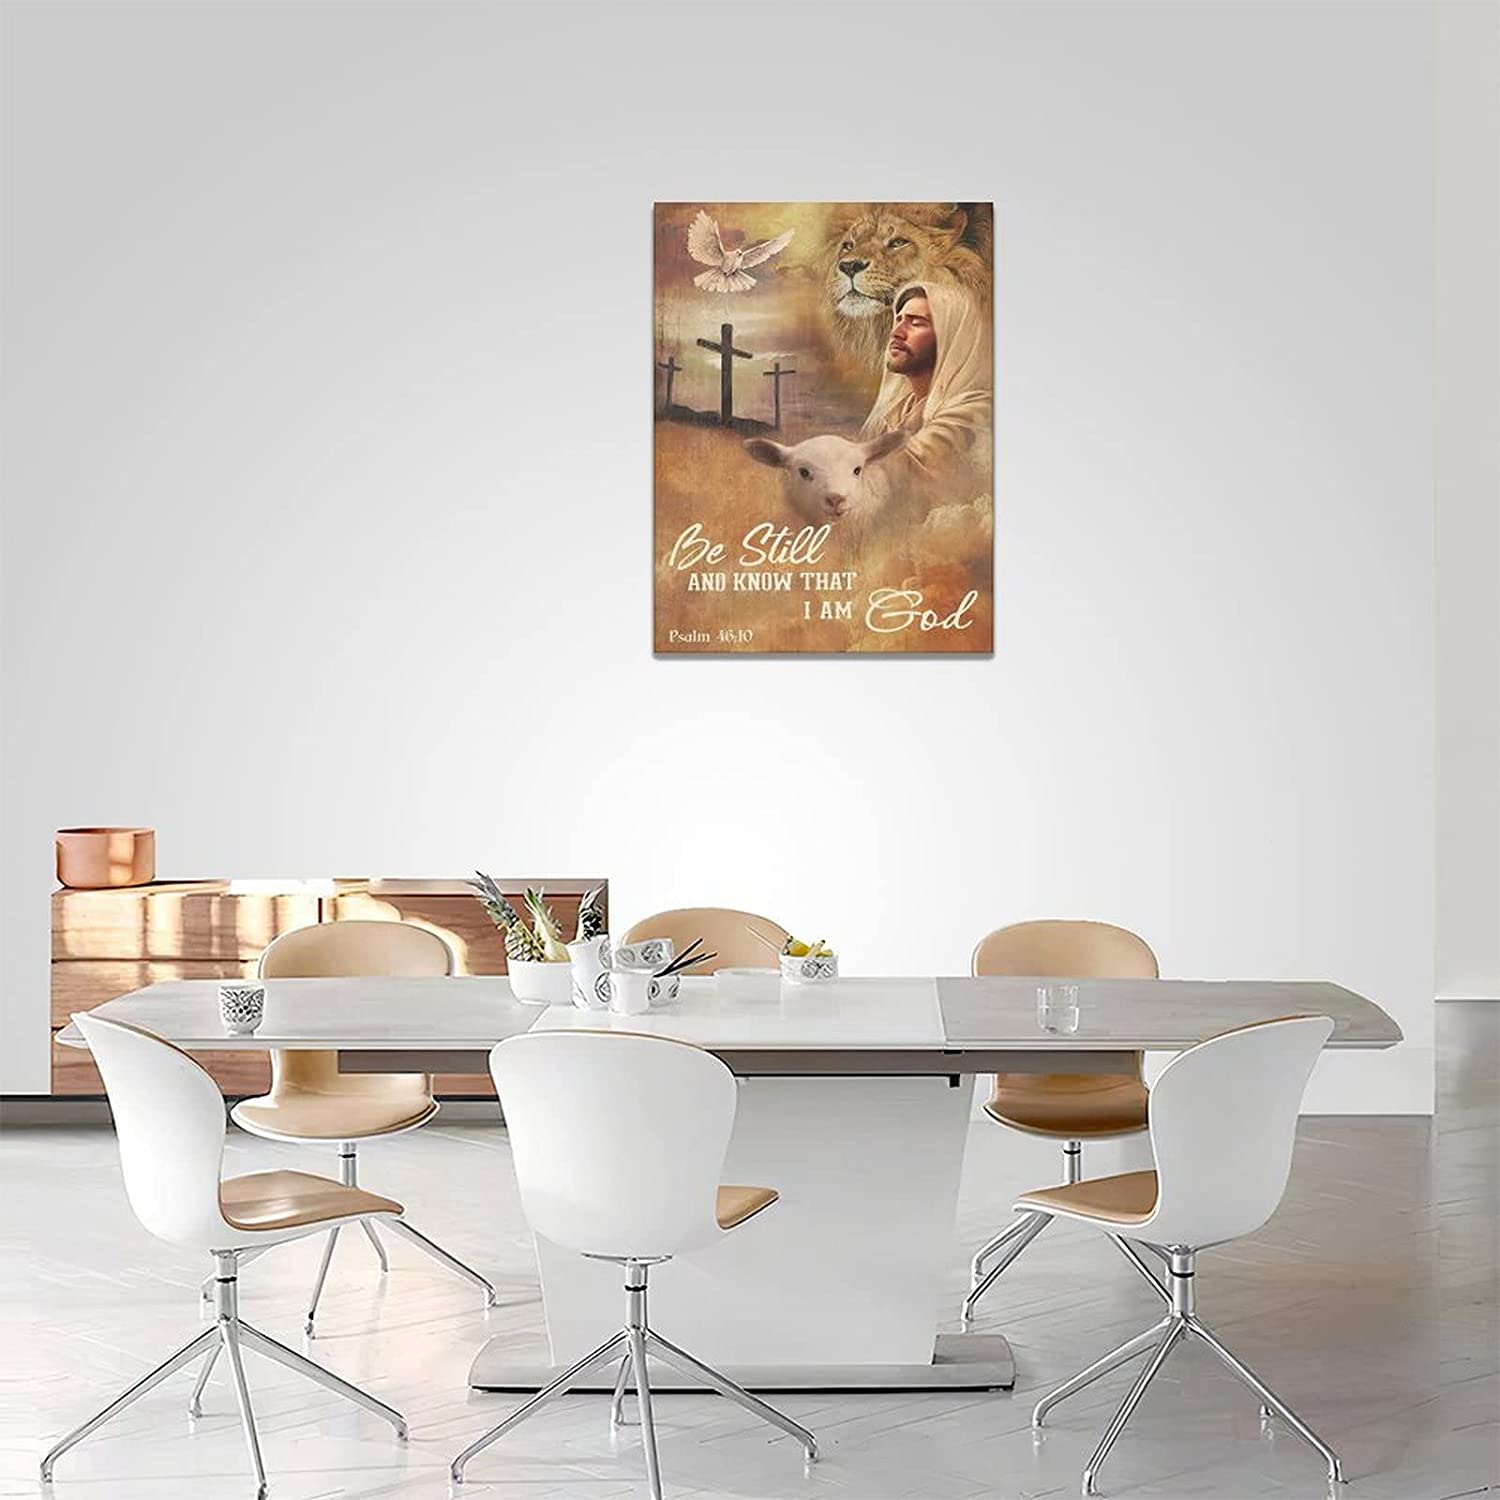 Jesus and Lion Canvas Wall Art Lion of Judah Wall Decor Christian Lion Lamb  Dove Cross Jesus Pictures for Wall Prints Inspirational Painting Modern  Religious Home Artwork Decor 12